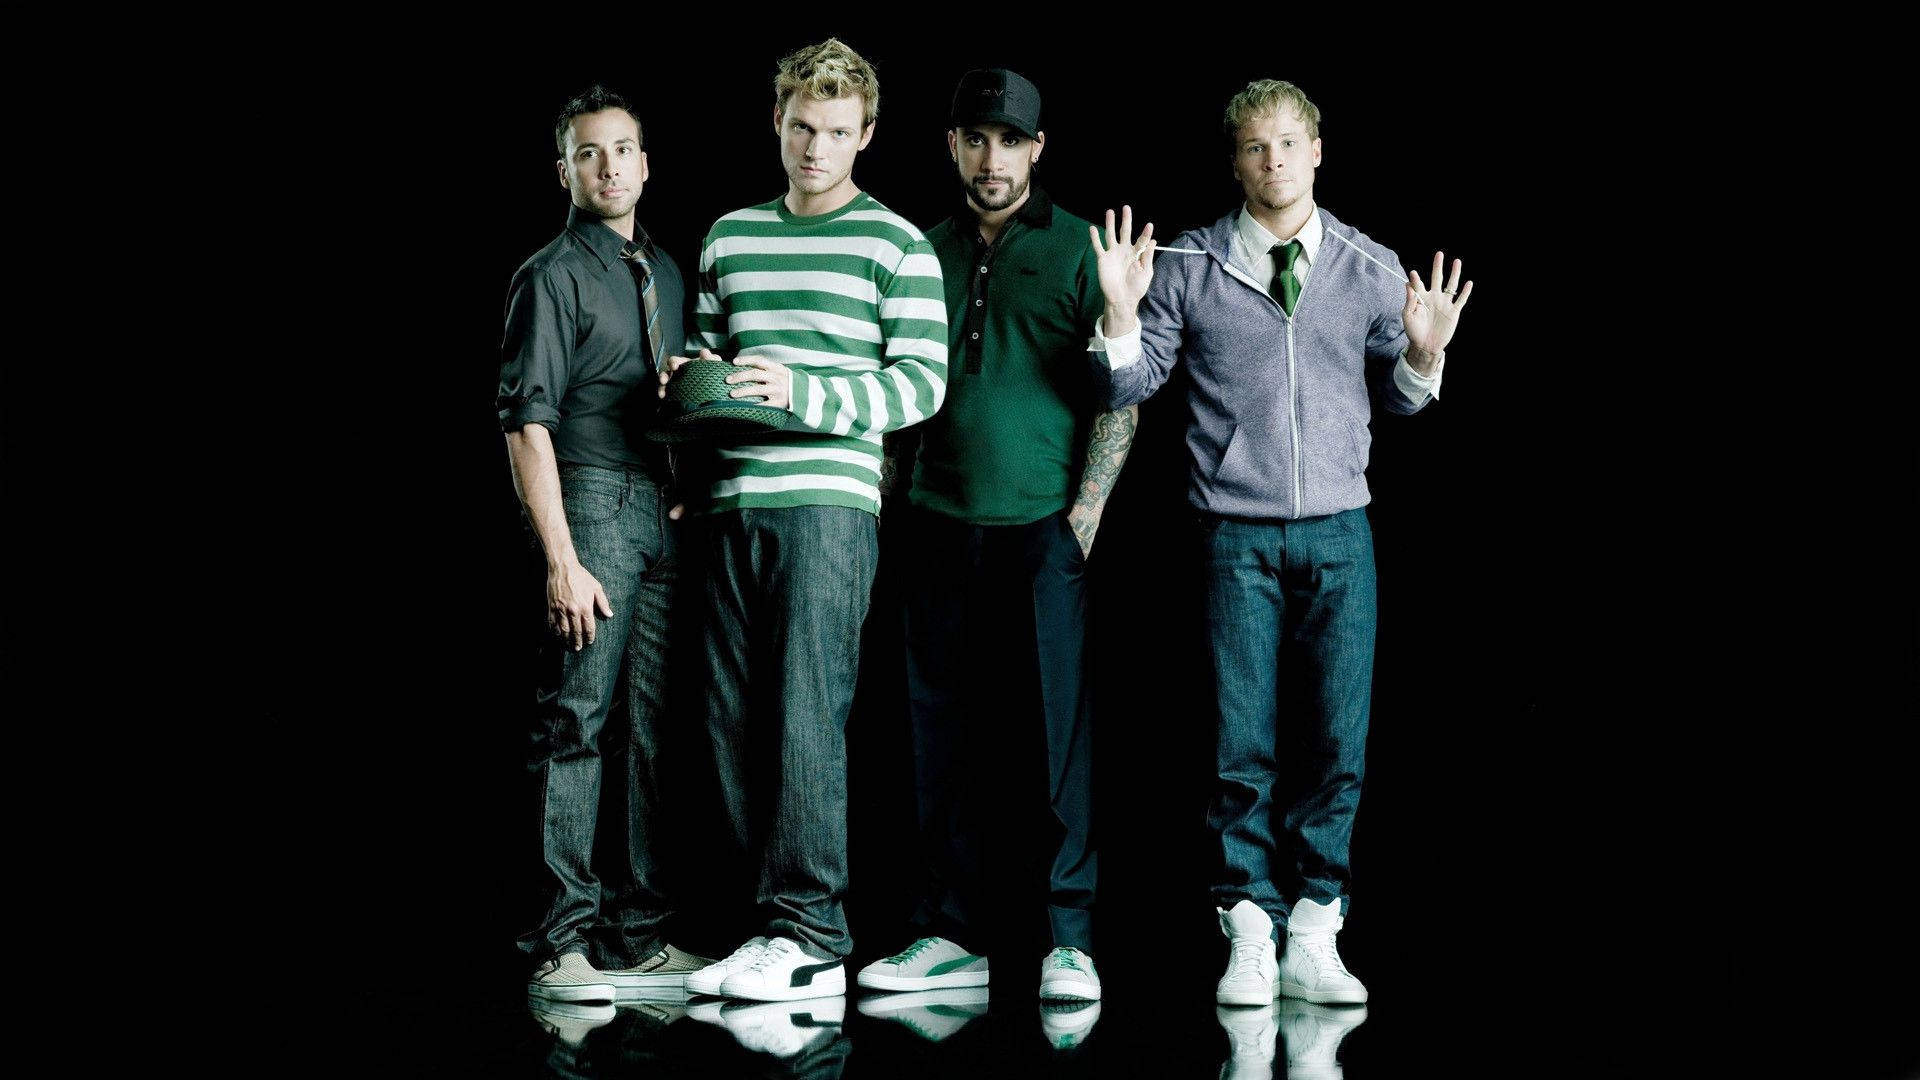 The Backstreet Boys In Green. Background